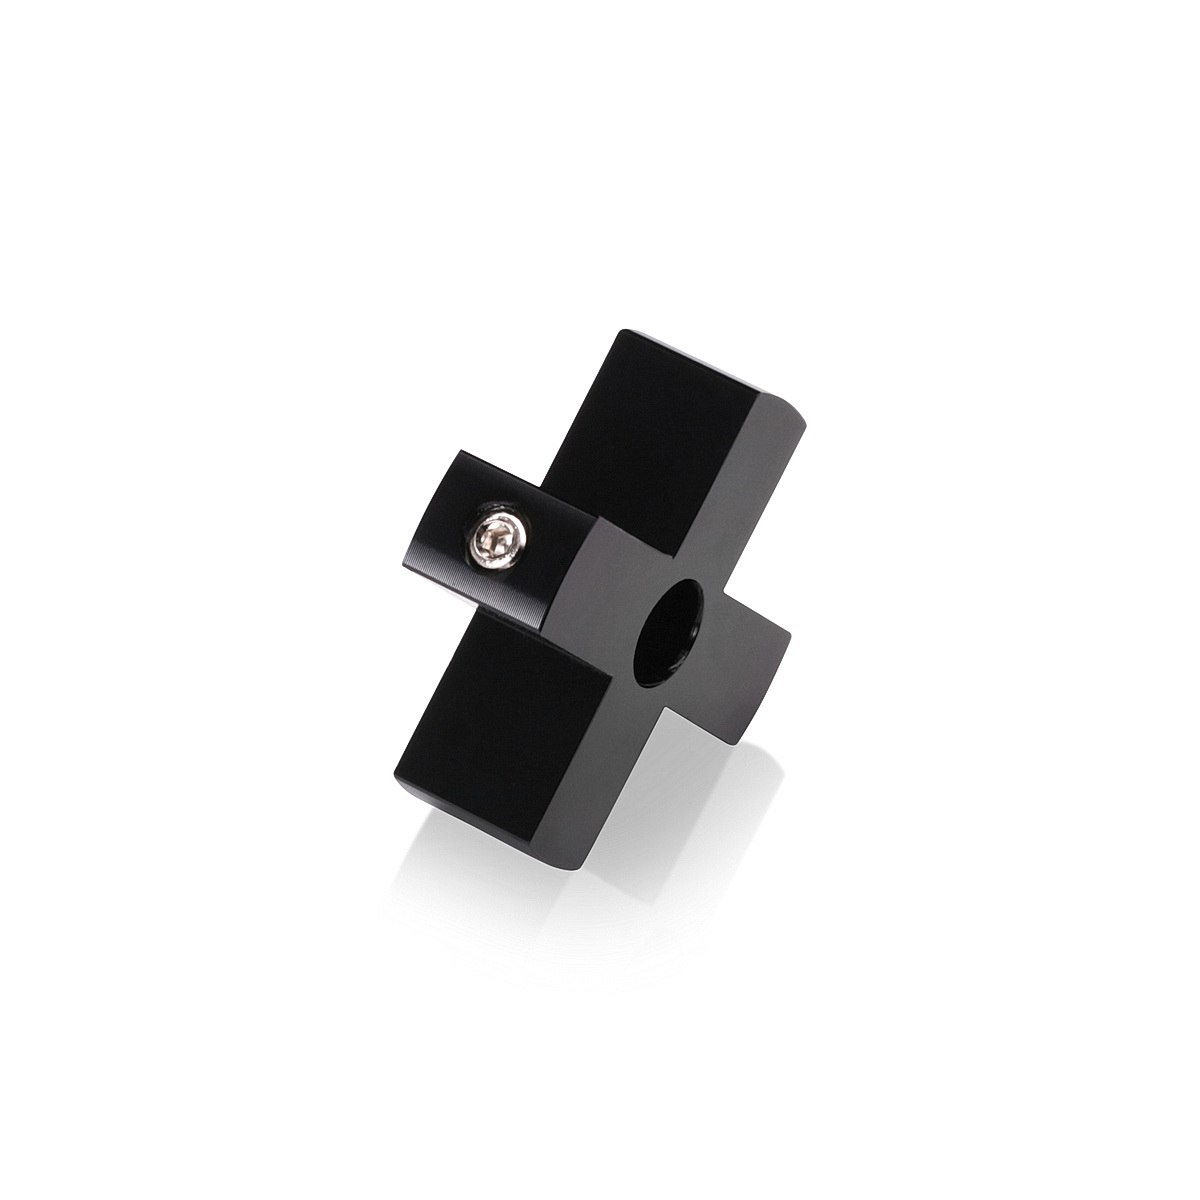 4-Way Standoffs Hub, Diameter: 1 1/2'', Thickness: 1/2'', Black Anodized Aluminum [Required Material Hole Size: 7/16'']